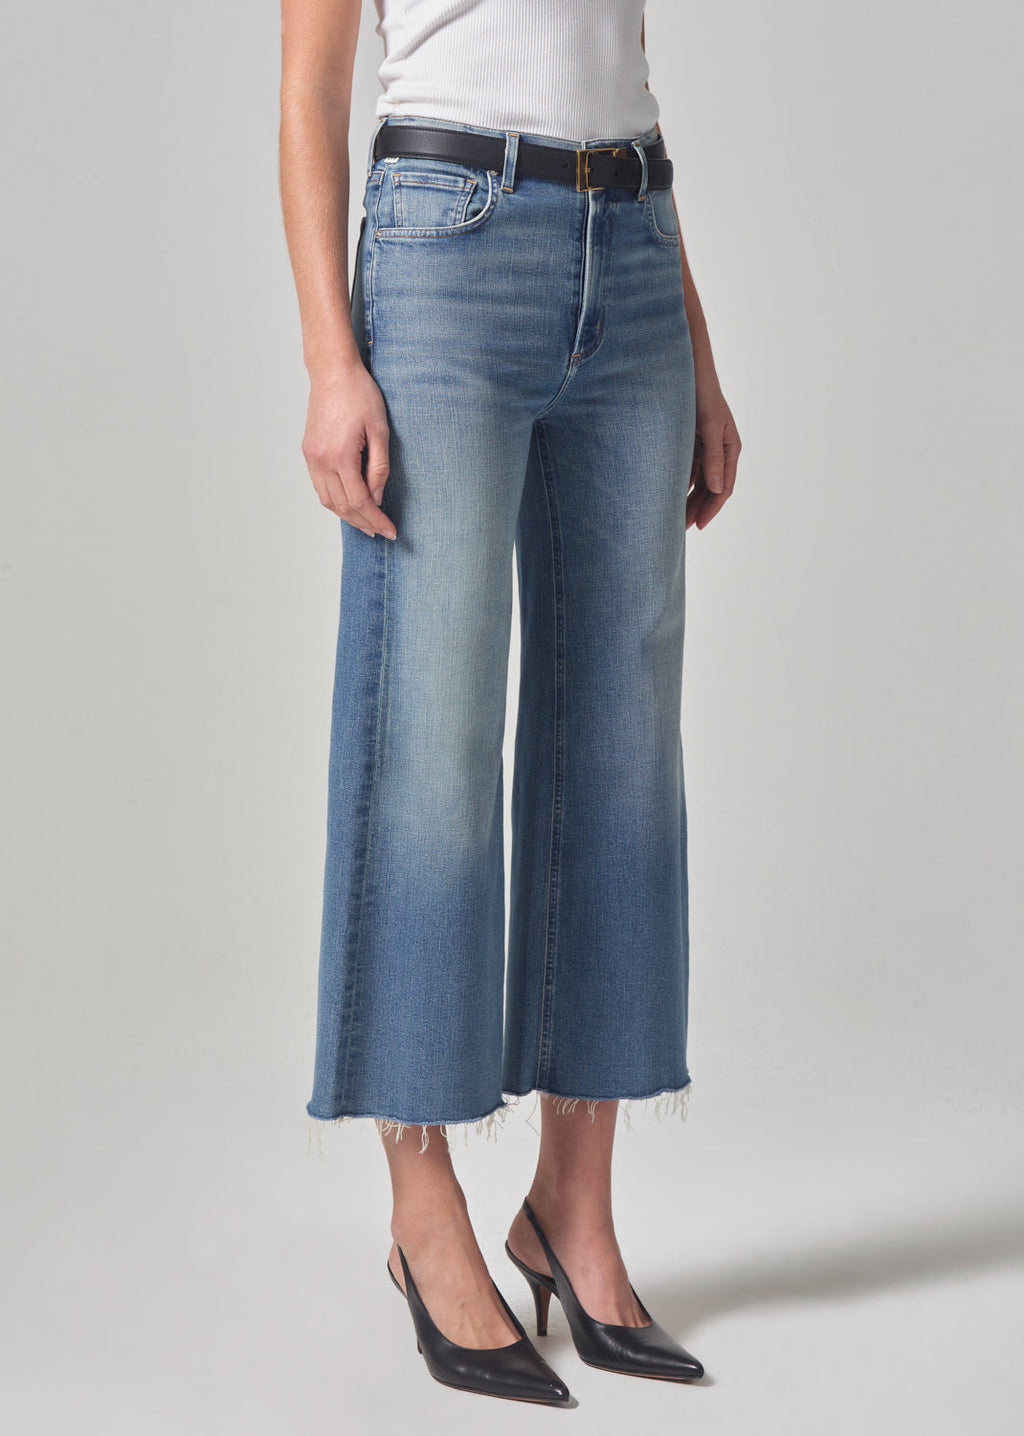 Citizens of Humanity Lyra Wide Leg Crop in Abliss